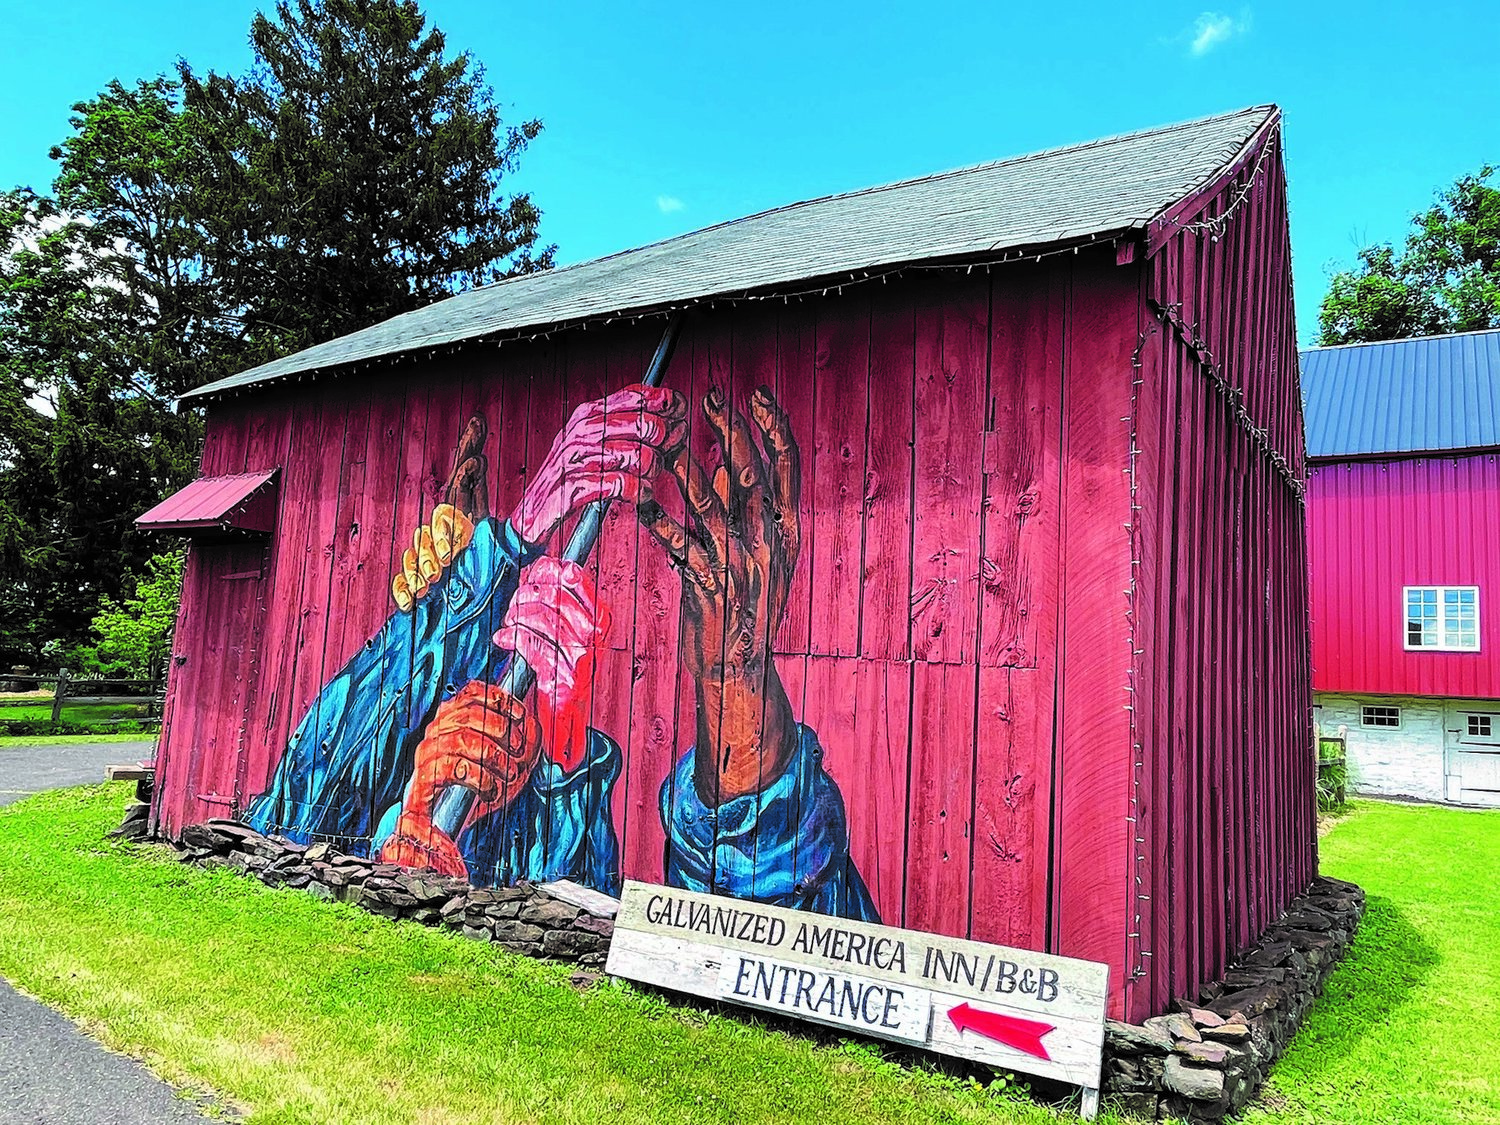 Bedminster artist Ed Bennett’s mural on the side of his barn evokes a message of inclusivity and diversity. To conclude the work, Bennett will mount an American flag on the roof right above the pole the hands are grasping.